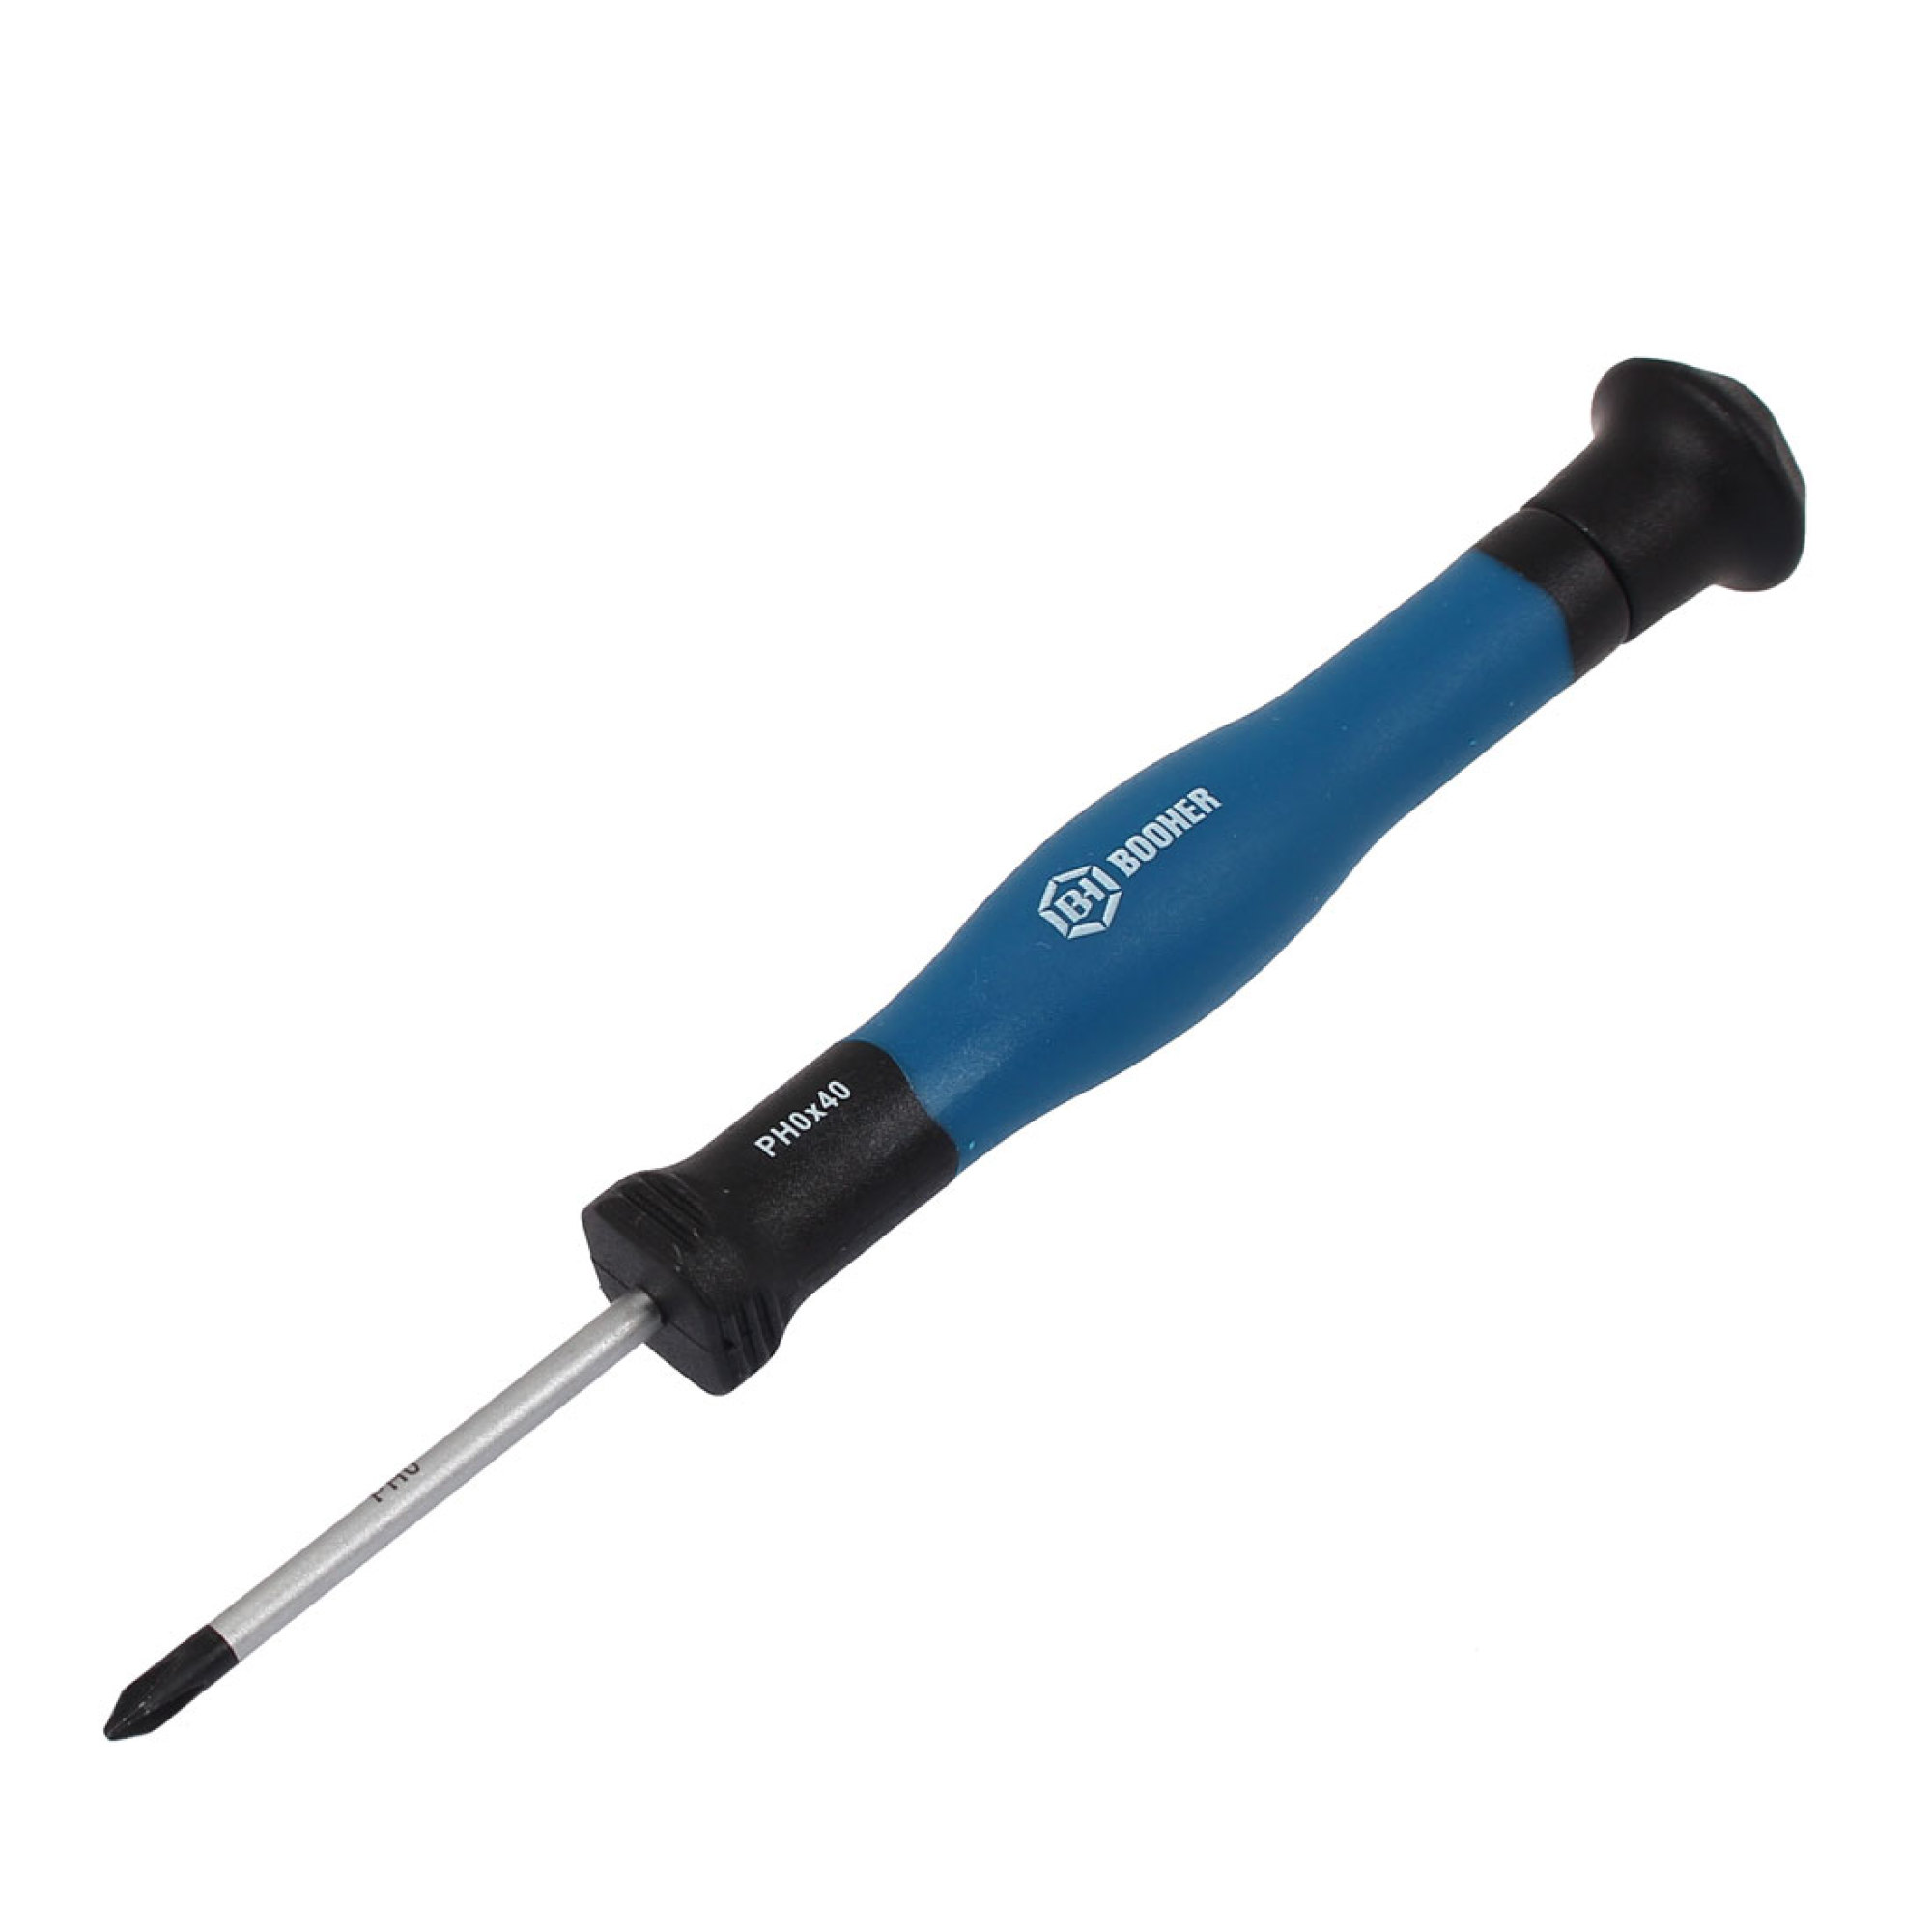 BOOHER Authorized PH0 Head 40mm Bar Phillips Screwdriver